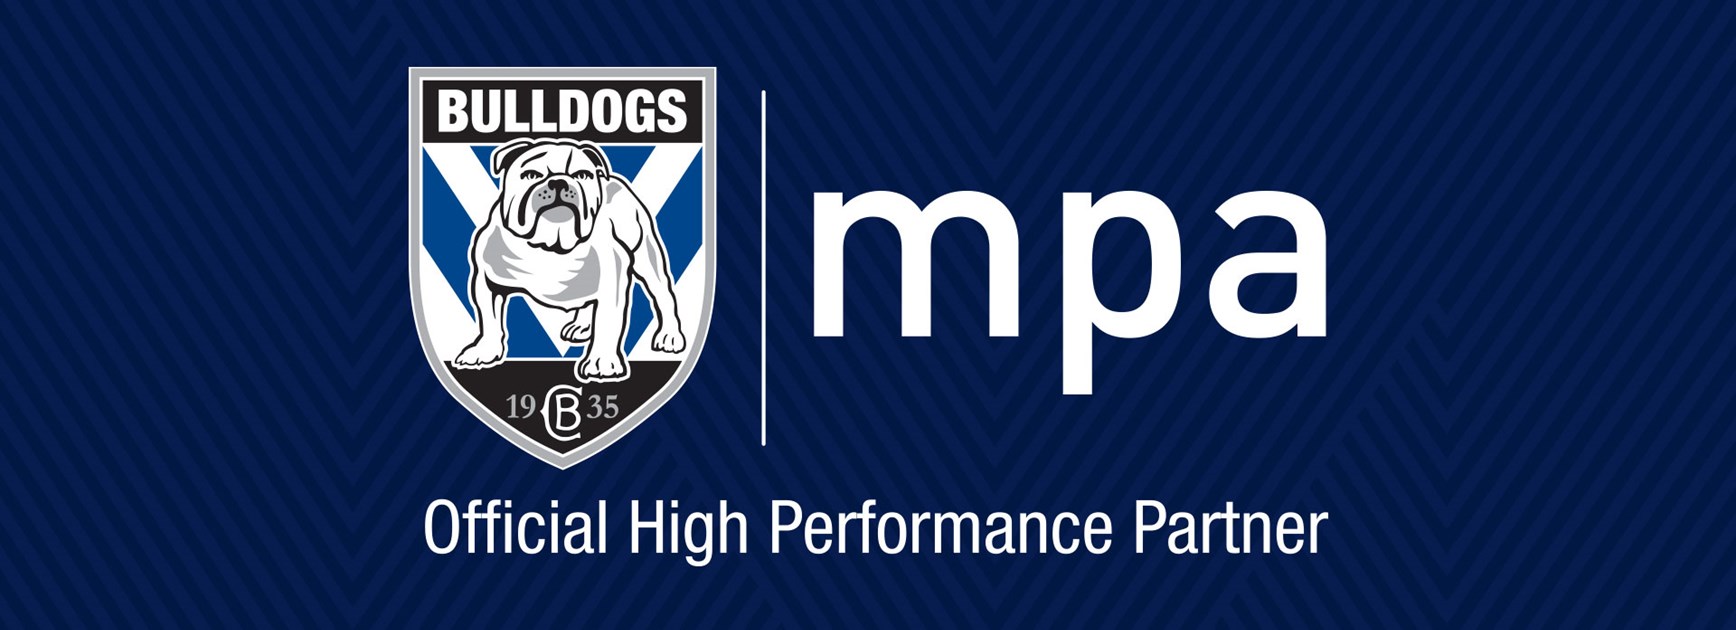 MPA extends its association with the Bulldogs as High Performance partner by a further two years